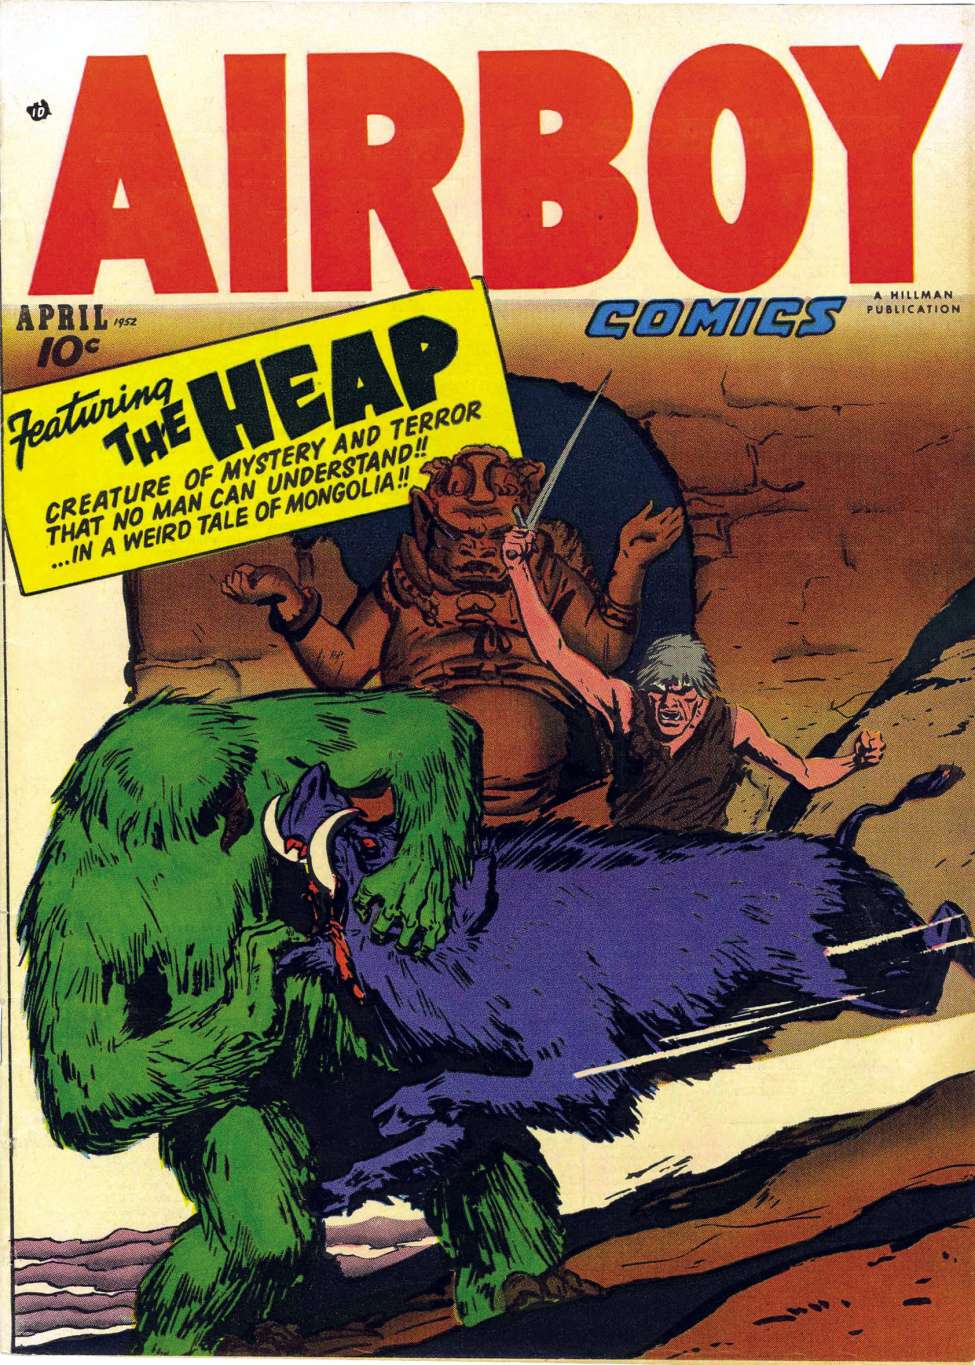 Book Cover For Airboy Comics v9 3